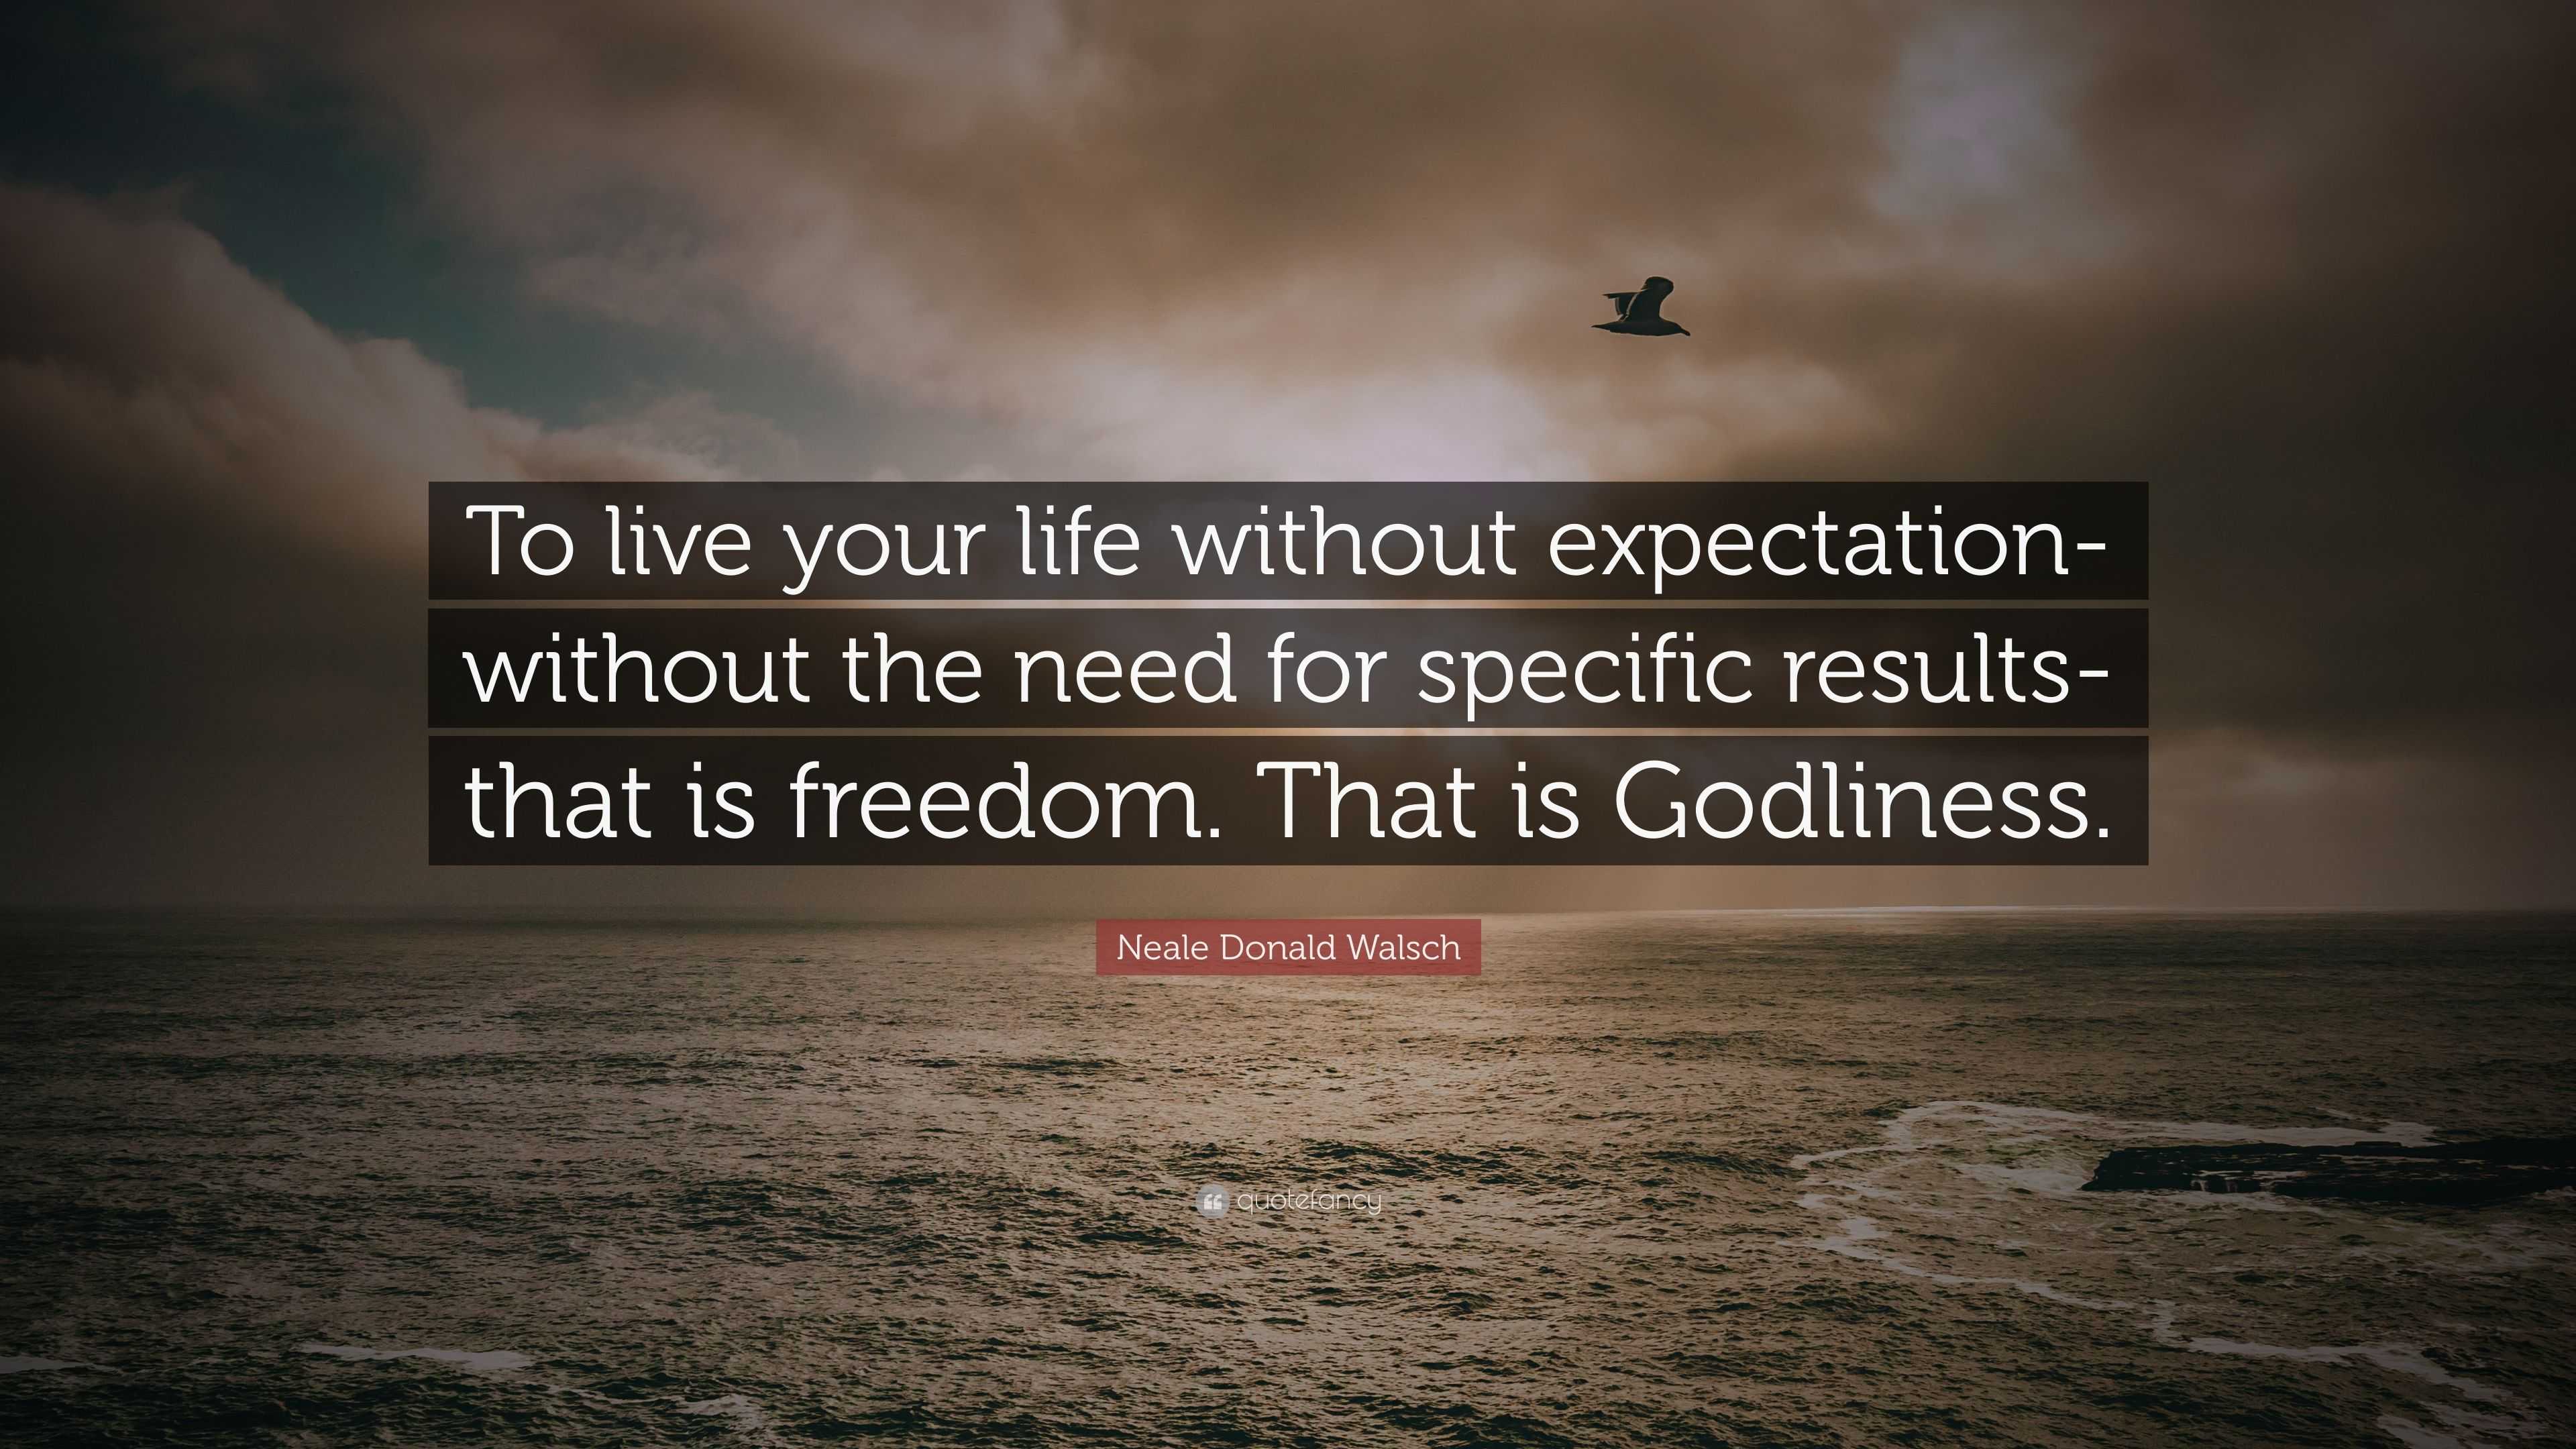 Neale Donald Walsch Quote “To live your life without expectation without the need